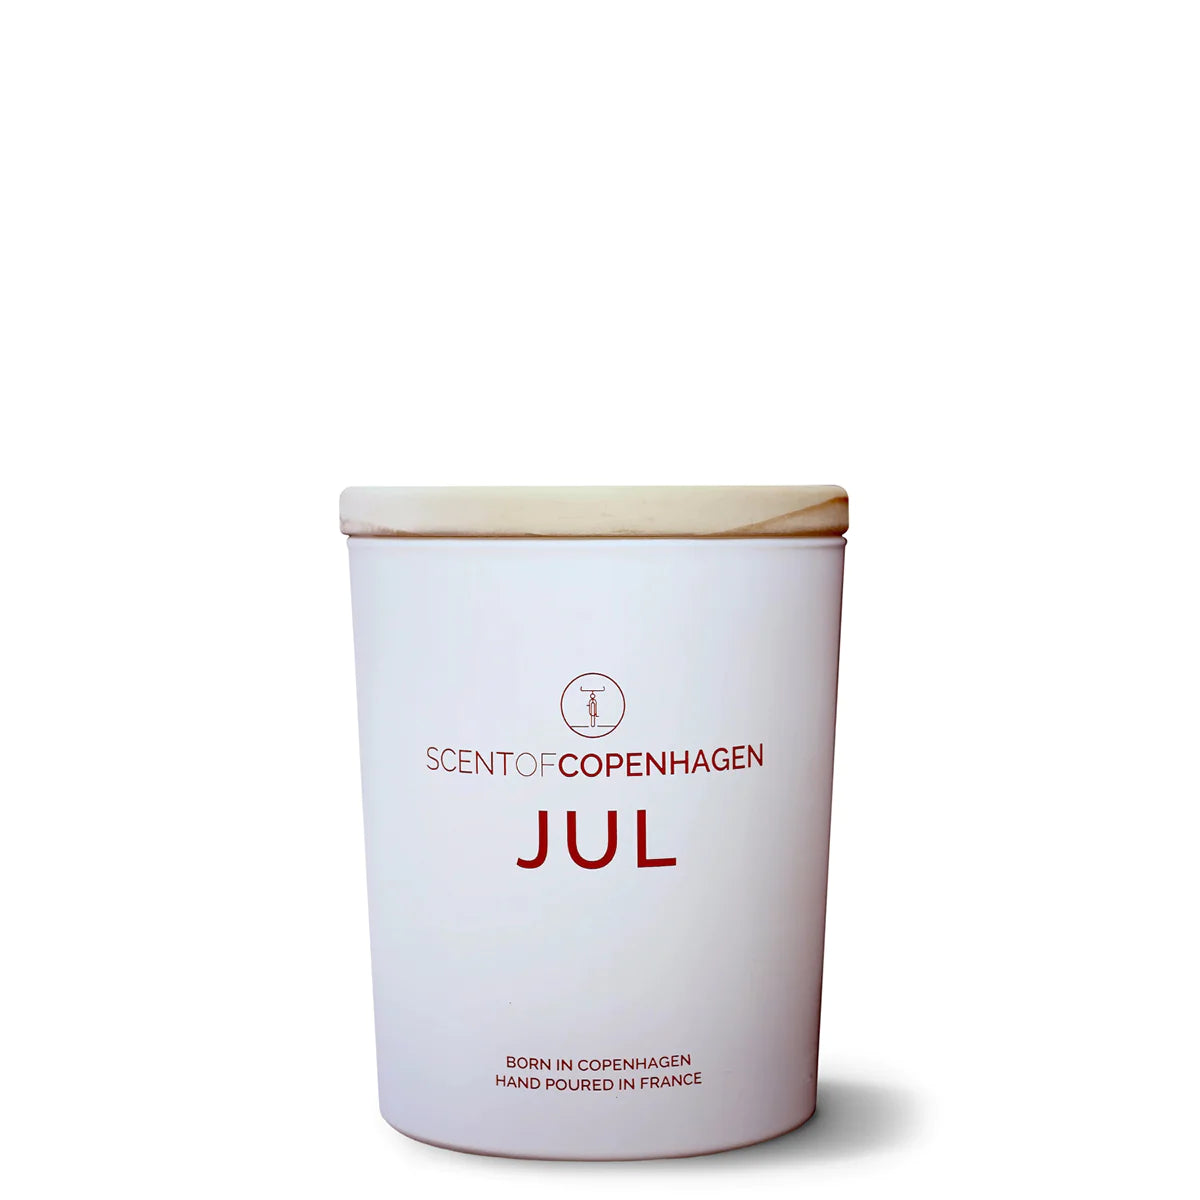 Scents of Copenhagen candle The Scent of JUL
Christmas Scent